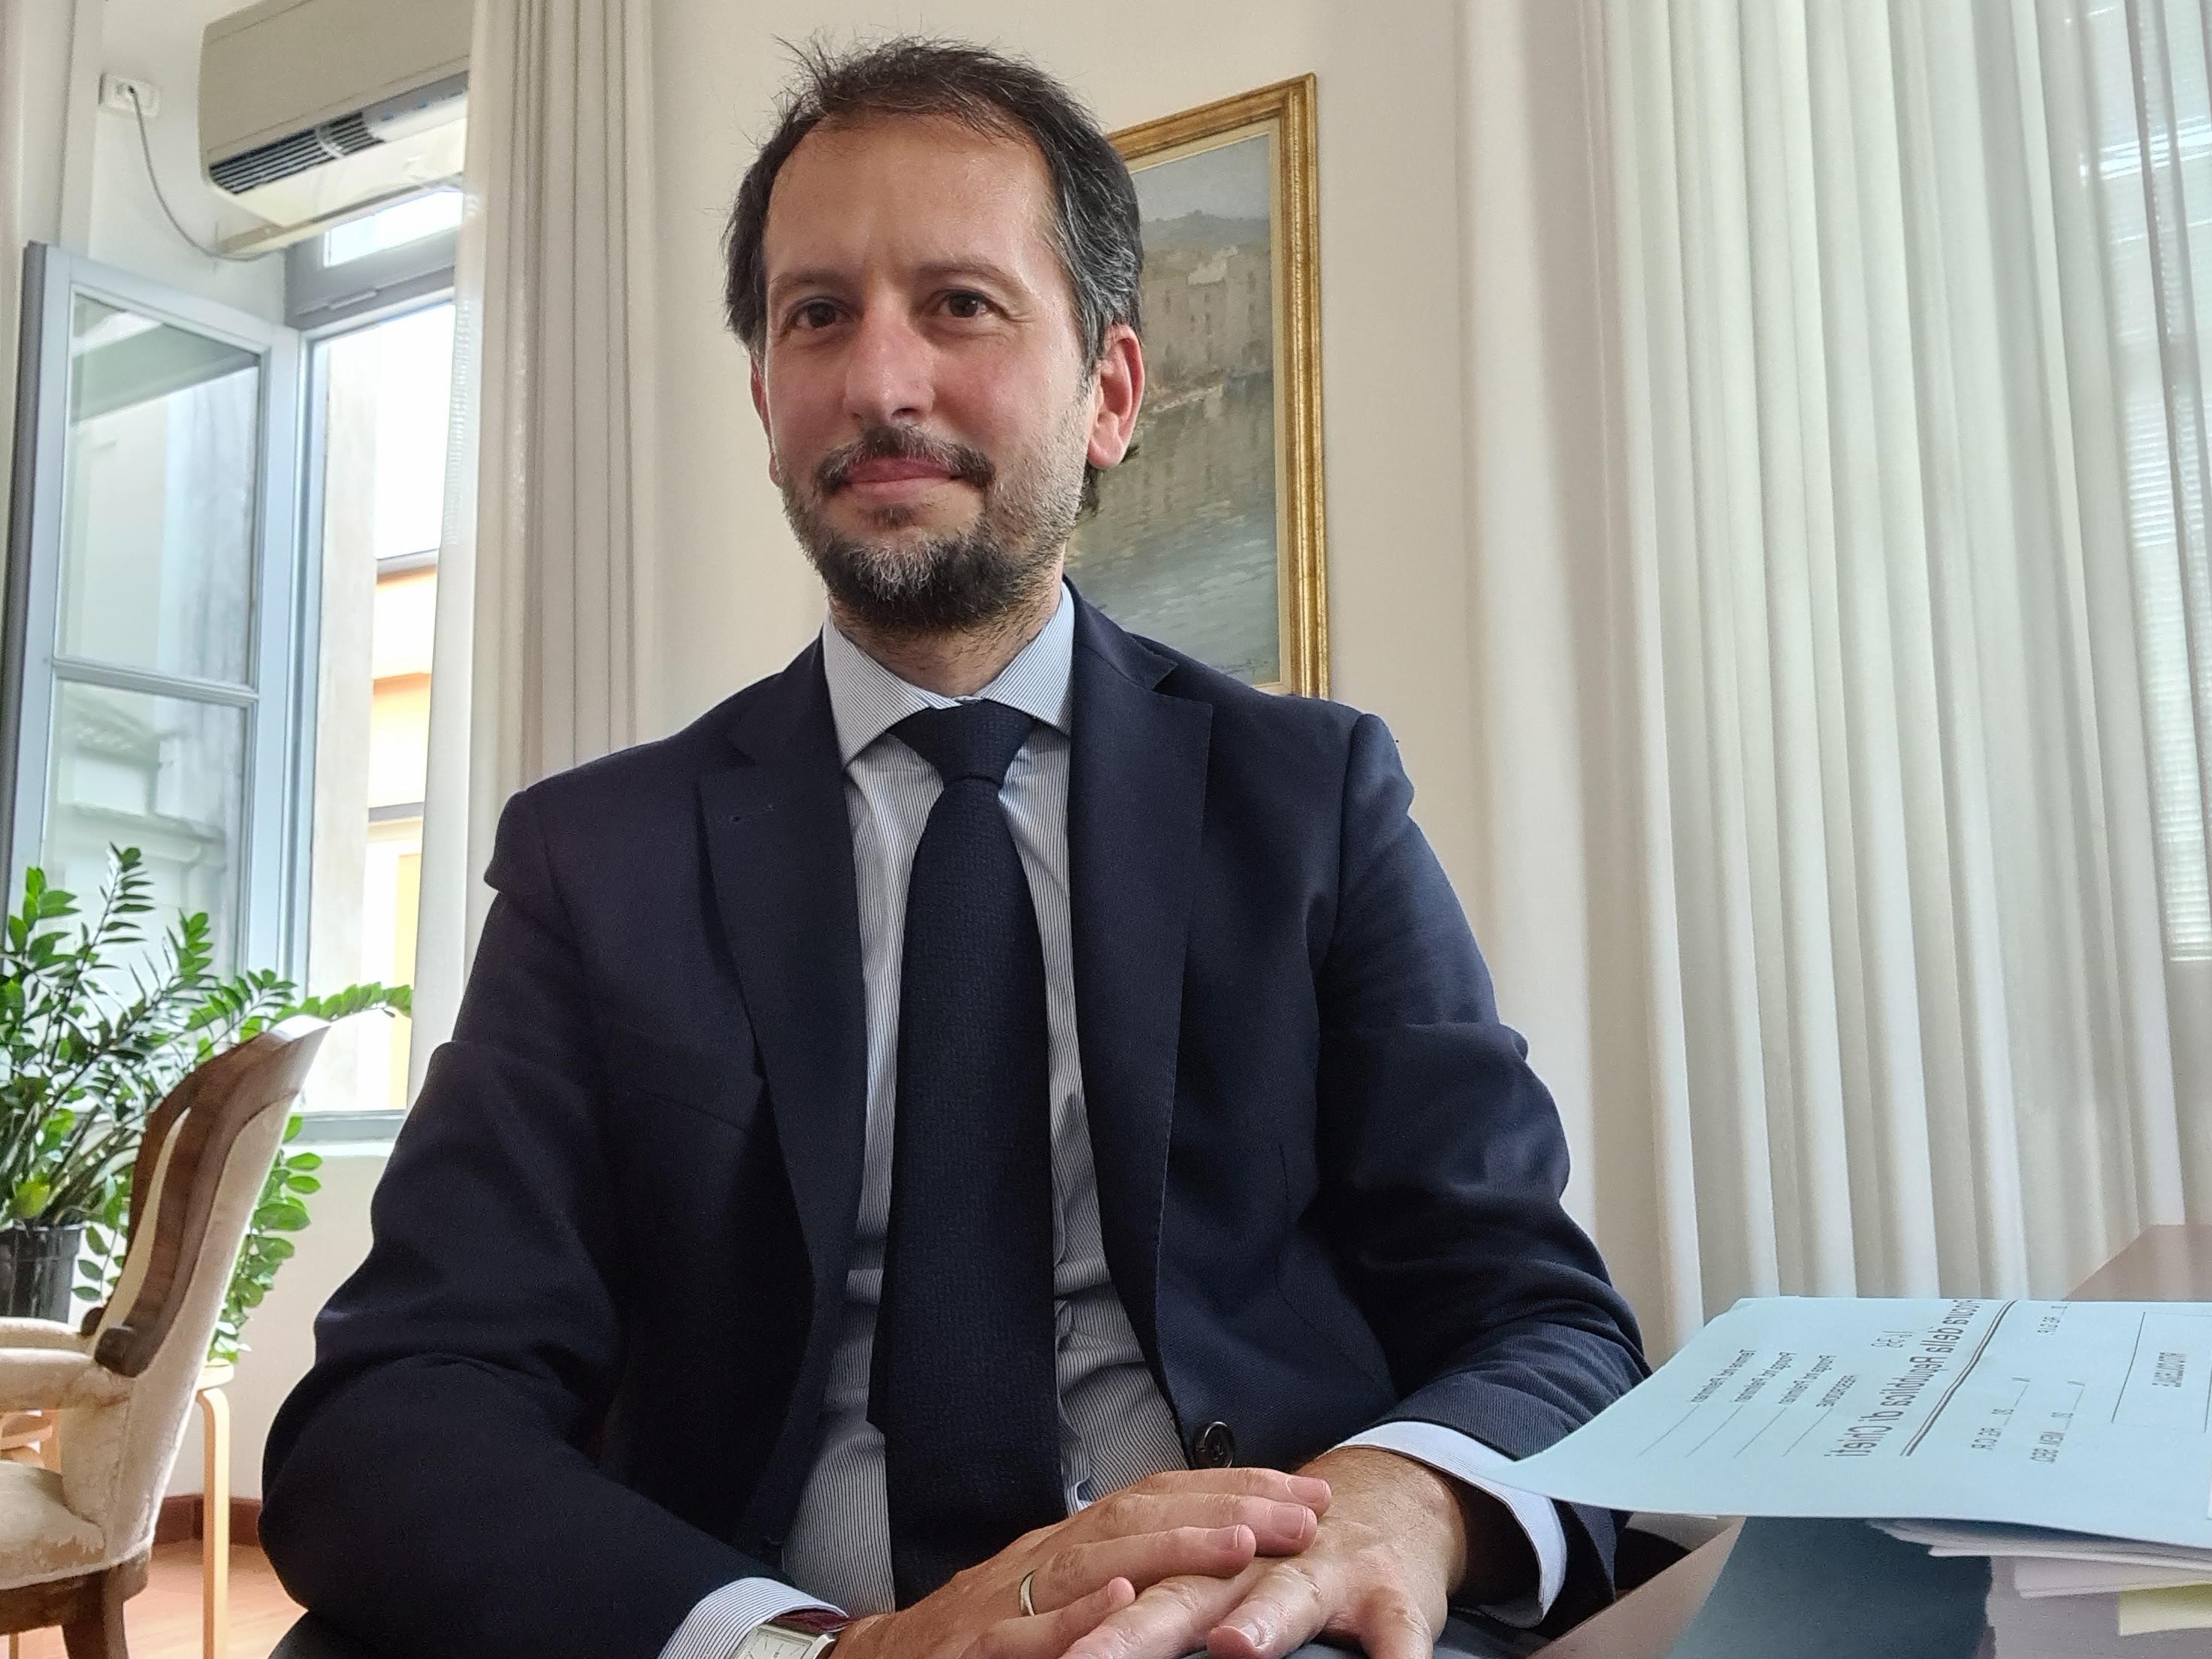 Francesco Testa, Chair of the Working Group on Smuggling
         of Migrants